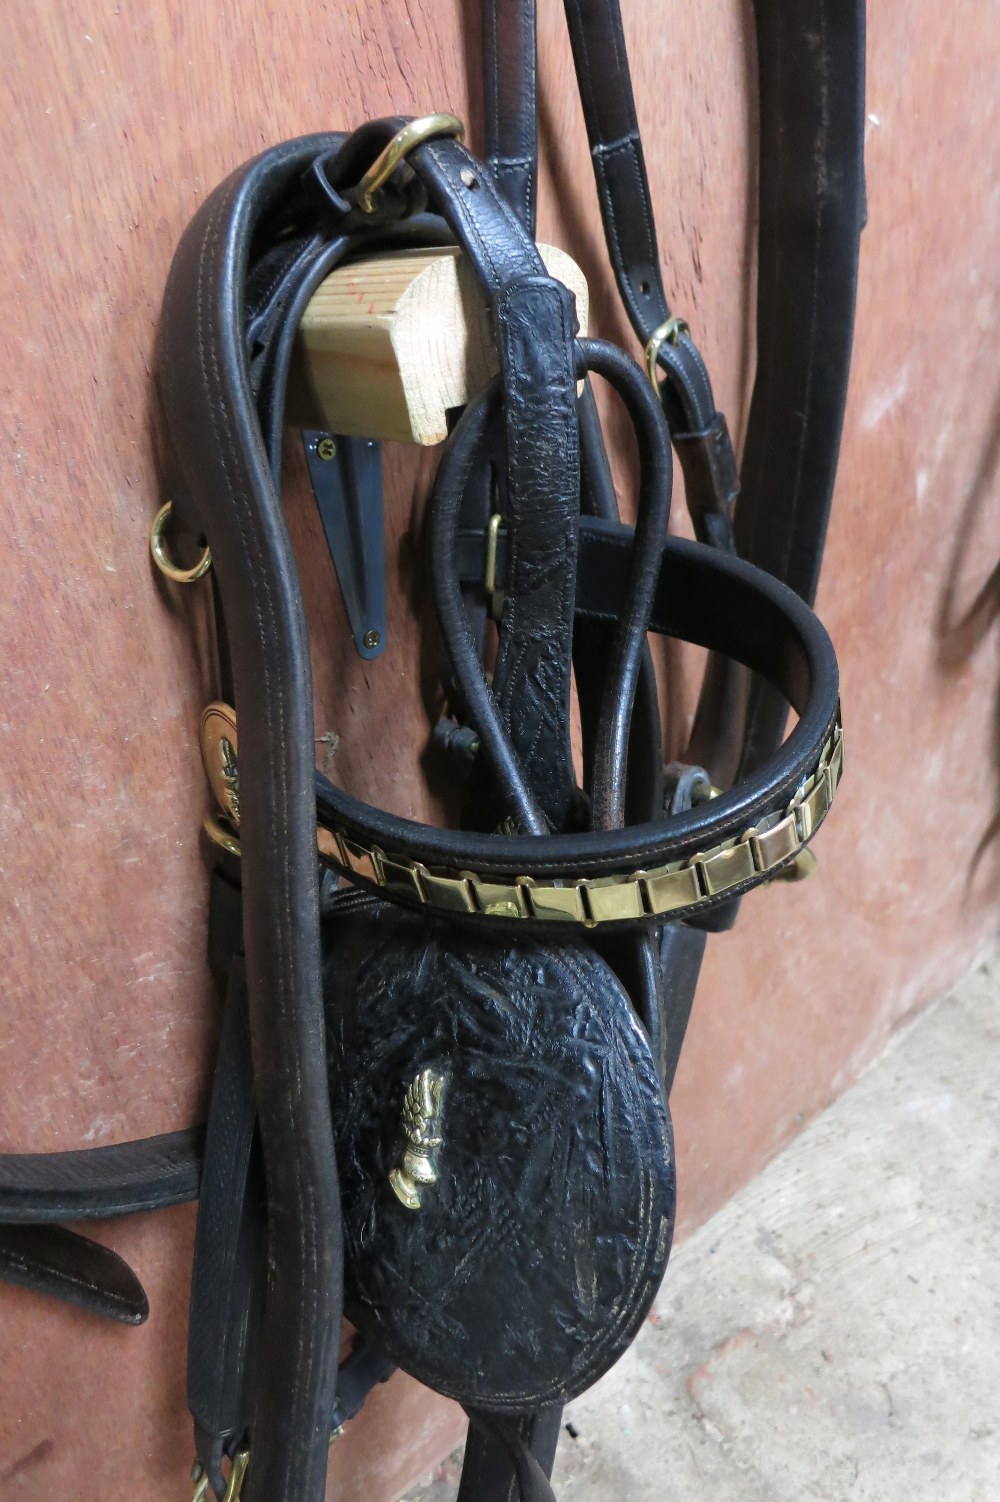 PAIR set of breastcollar harness possibly German, with crests on the bridles - Image 3 of 3